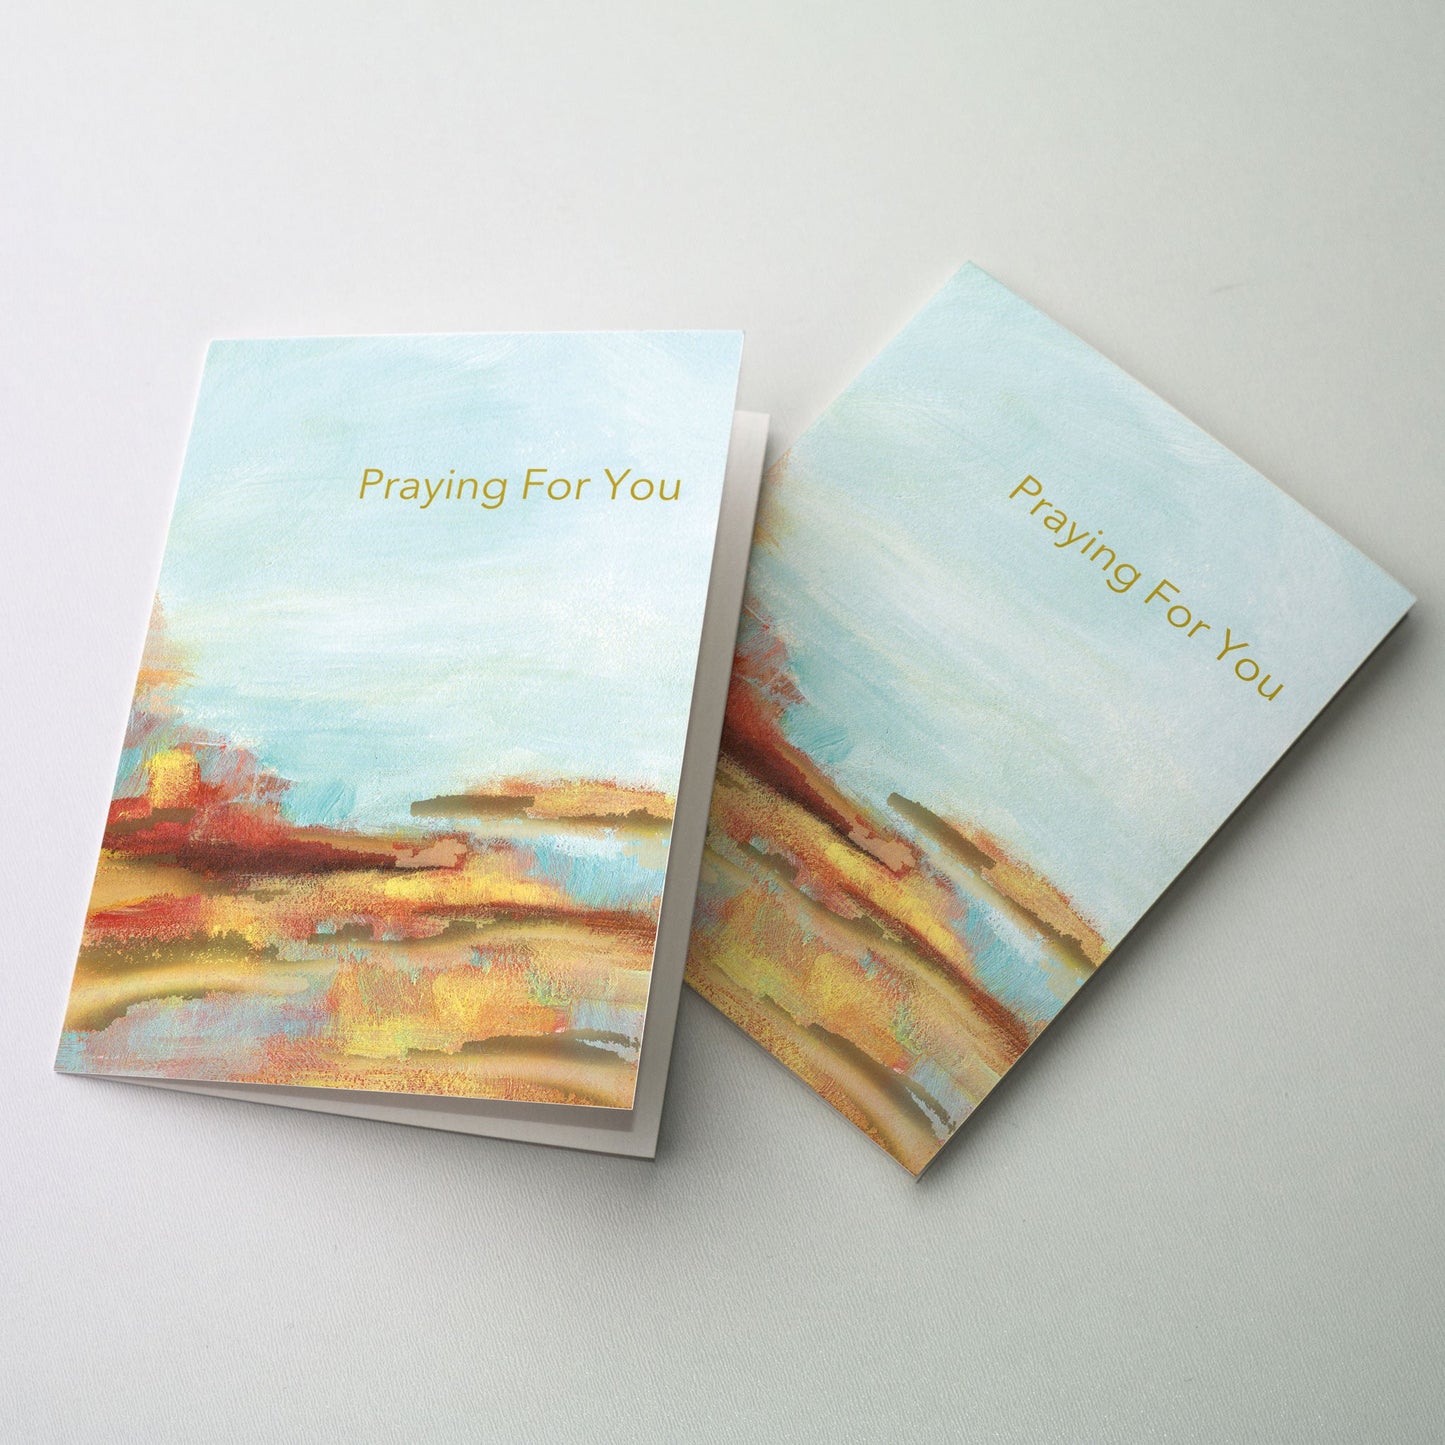 A softly painted landscape expresses well the sentiment of this card.